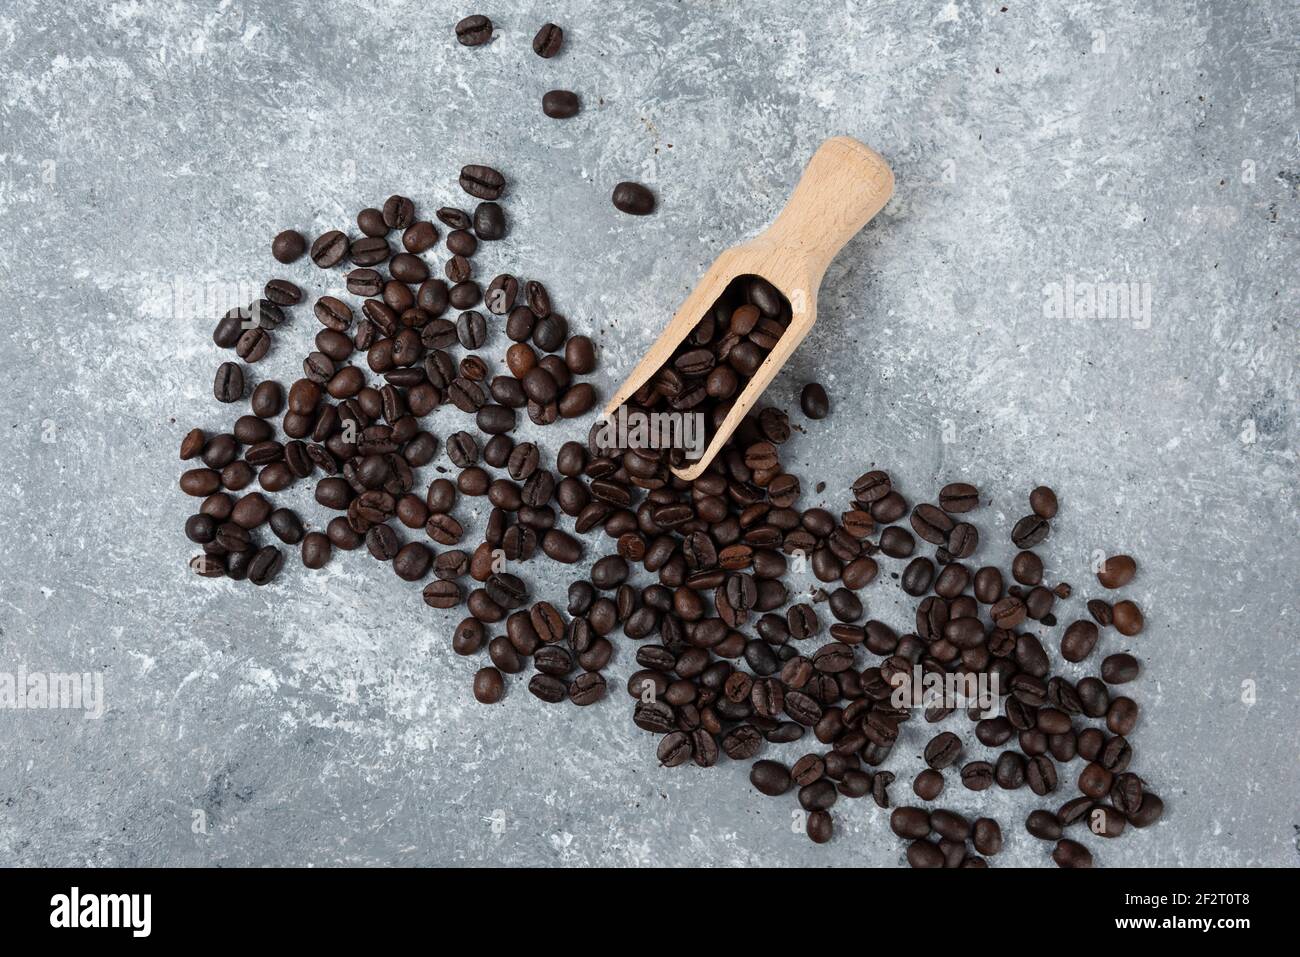 Wooden spoon and scattered roasted coffee beans on marble surface Stock Photo